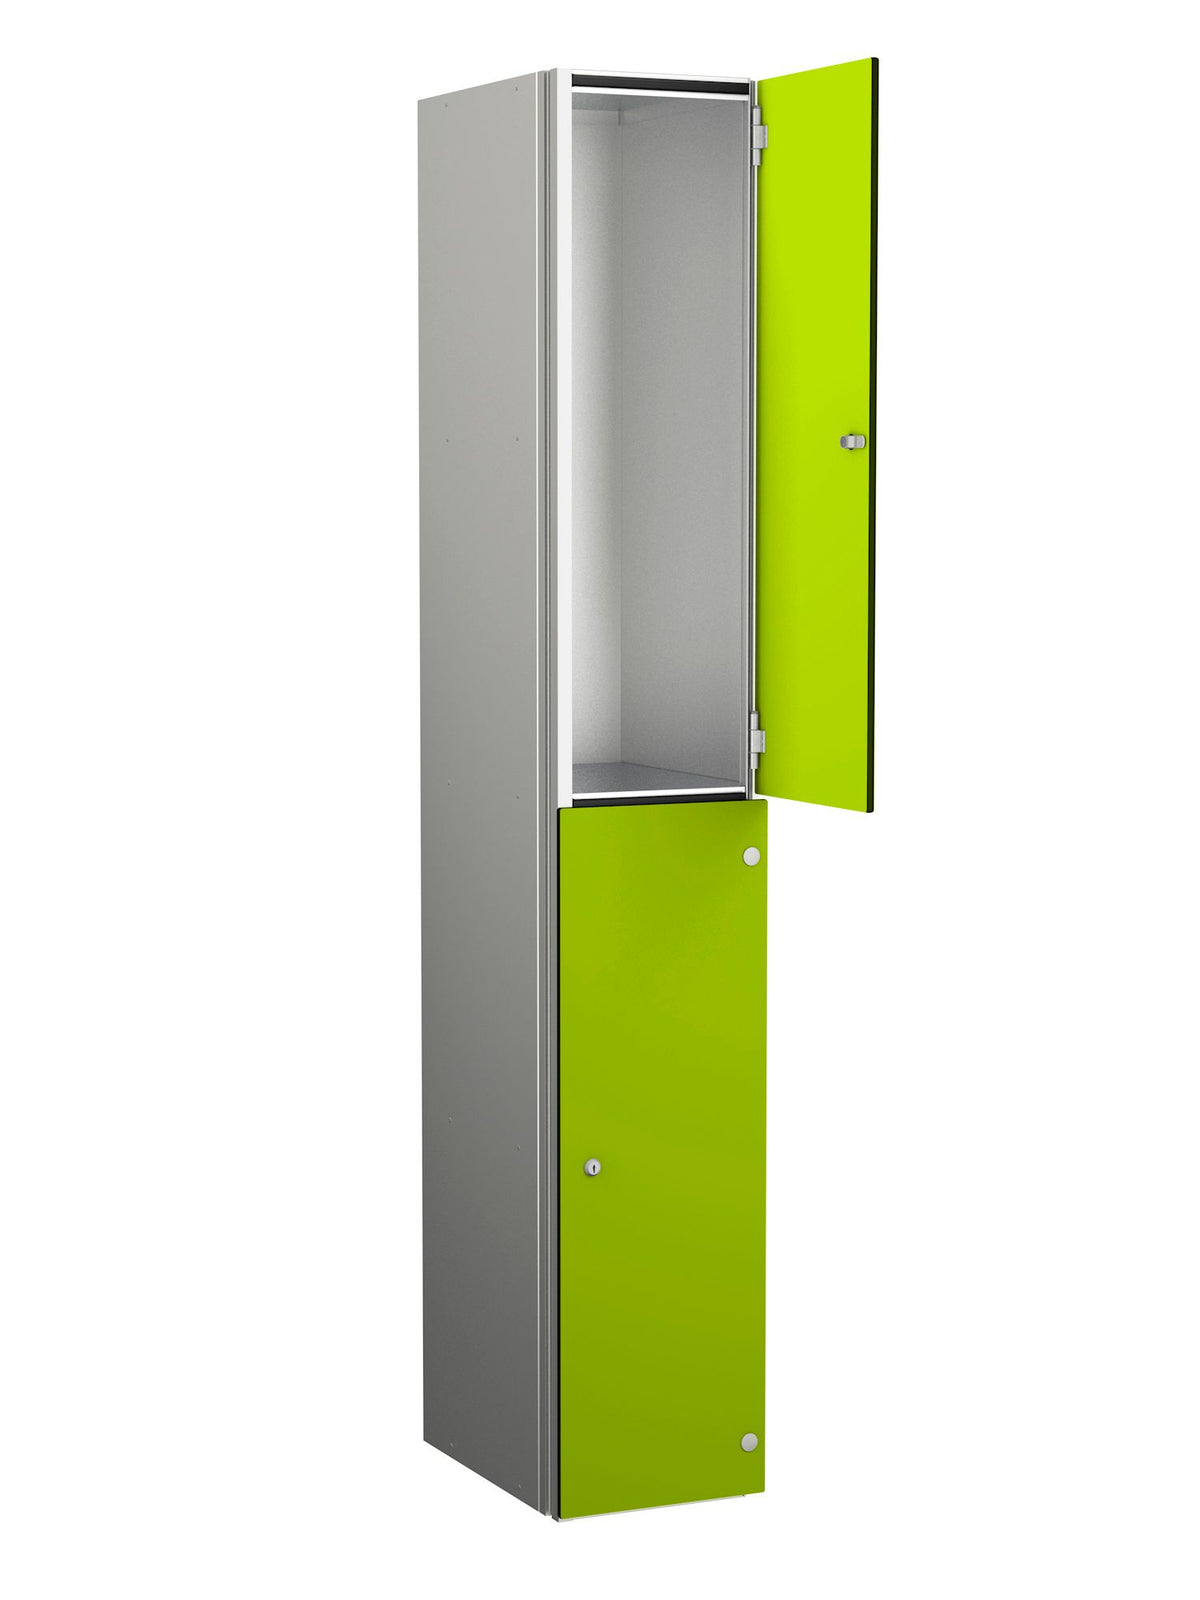 ZENBOX WET AREA LOCKERS WITH SGL DOORS - LIME GREEN 2 DOOR Storage Lockers > Lockers > Cabinets > Storage > Probe > One Stop For Safety   